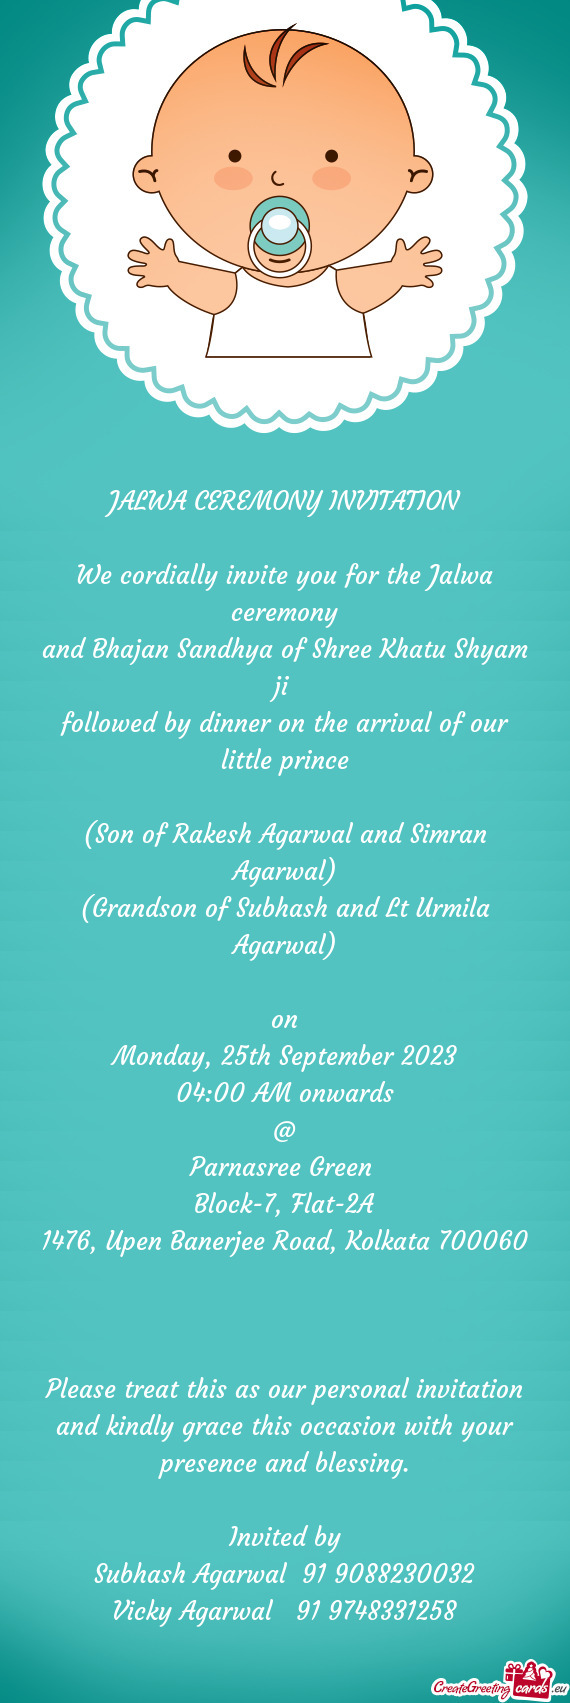 We cordially invite you for the Jalwa ceremony